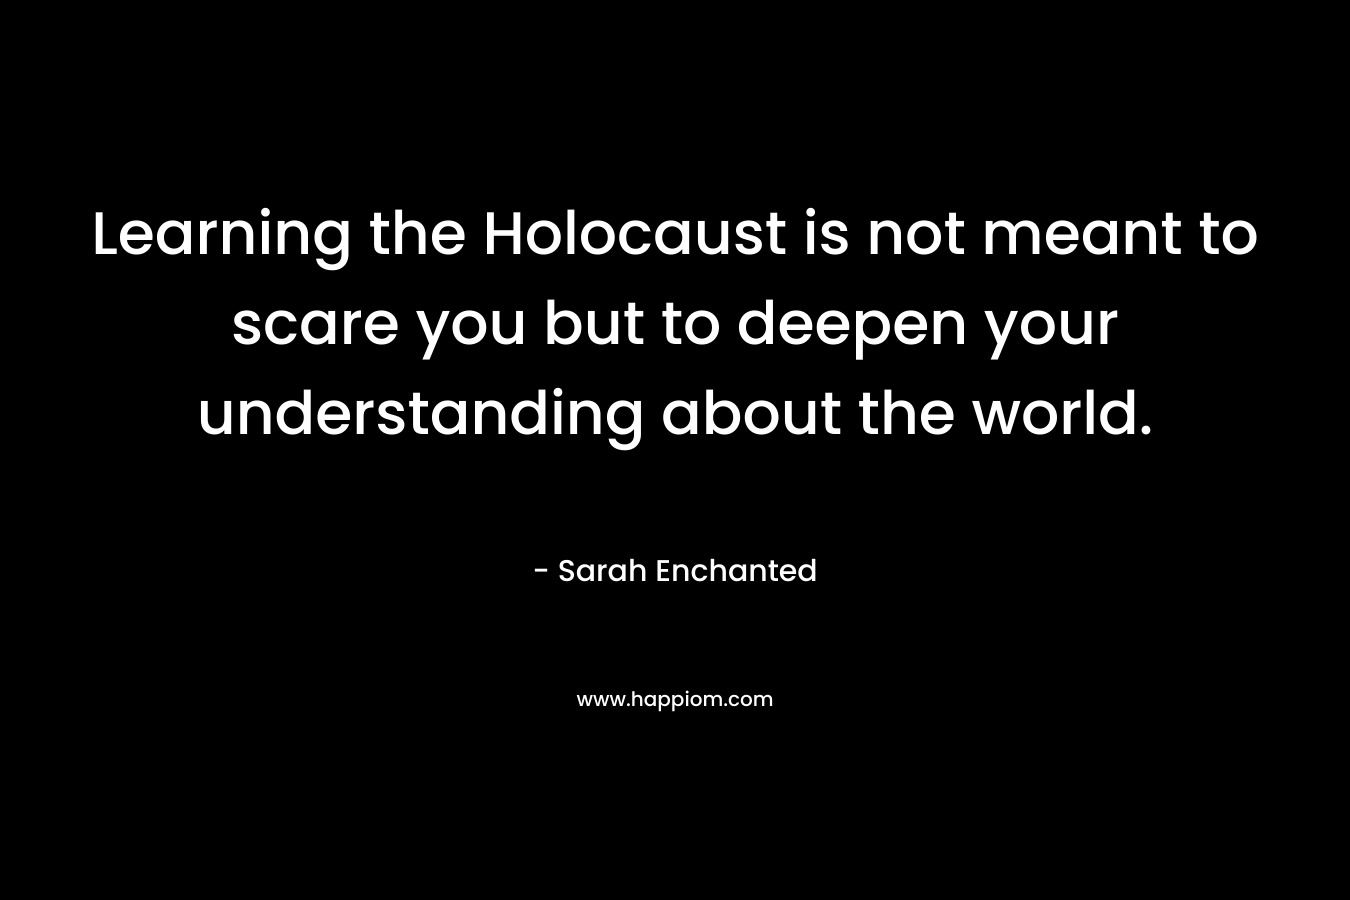 Learning the Holocaust is not meant to scare you but to deepen your understanding about the world. – Sarah Enchanted